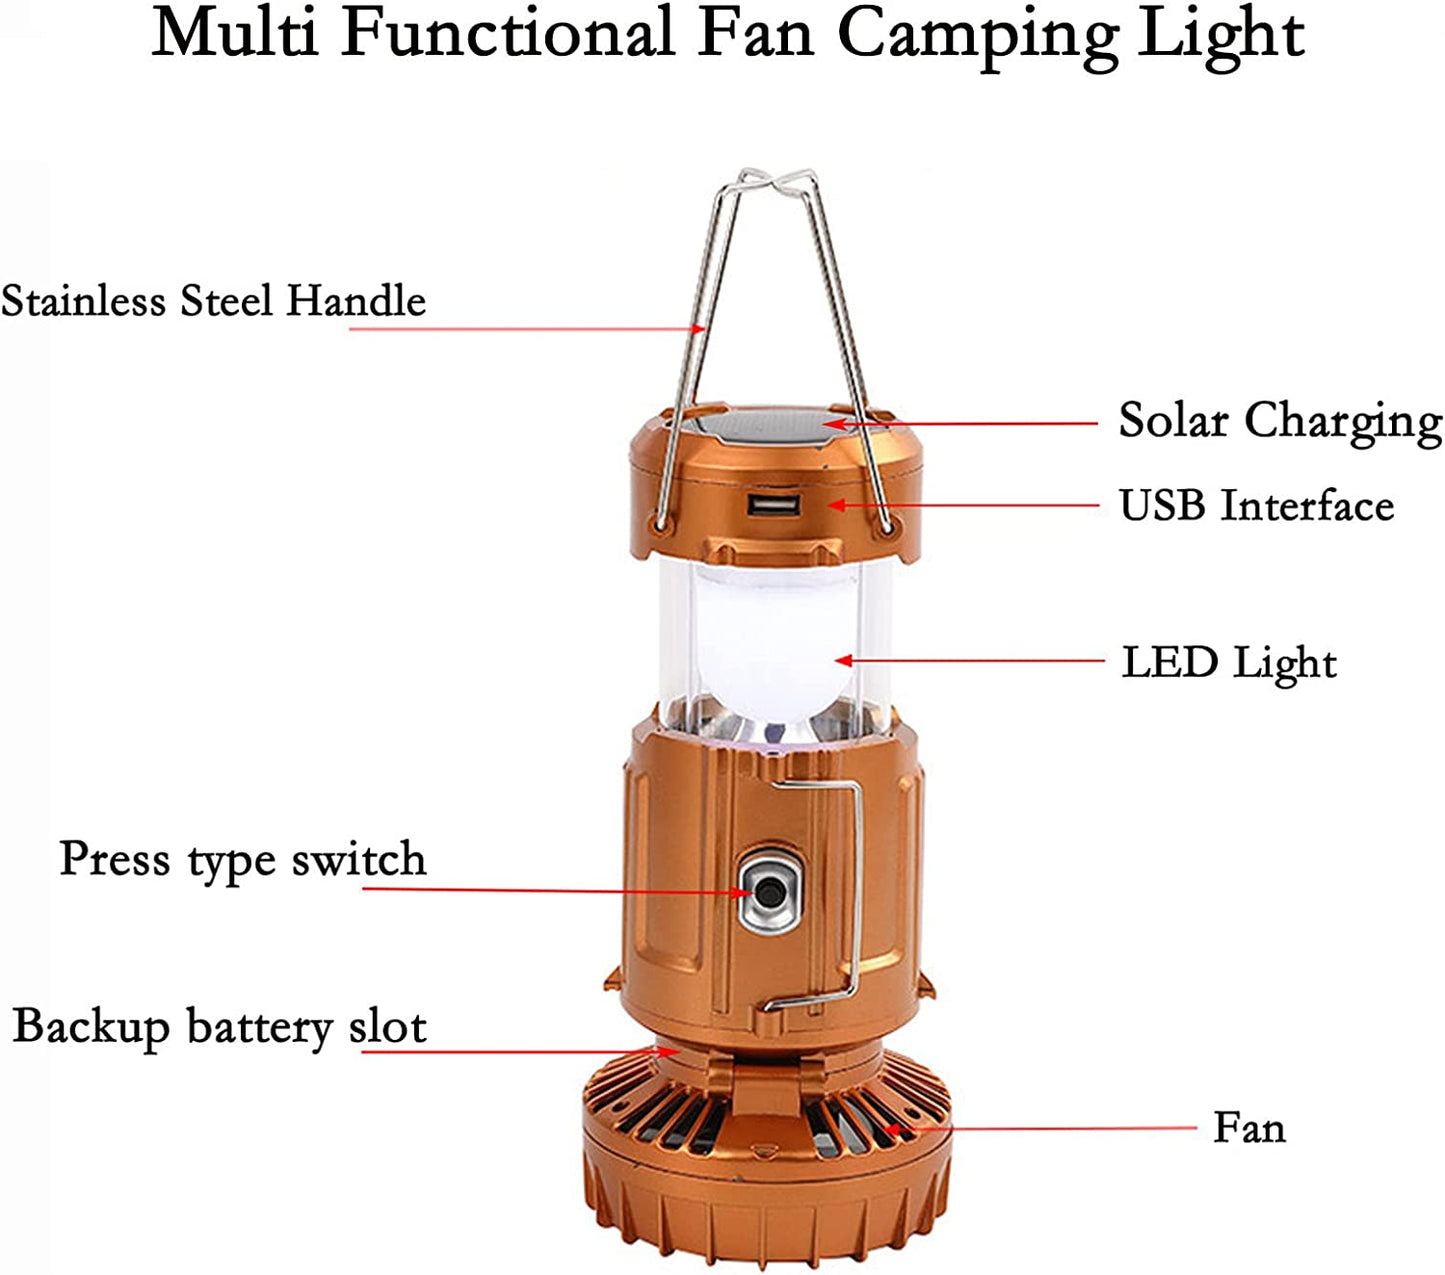 Solar & Battery Powered Collapsible-USB Camping Lamp with Fan for Picnic, Barbecue, Fishing, Travel Rechargeable Emergency Light